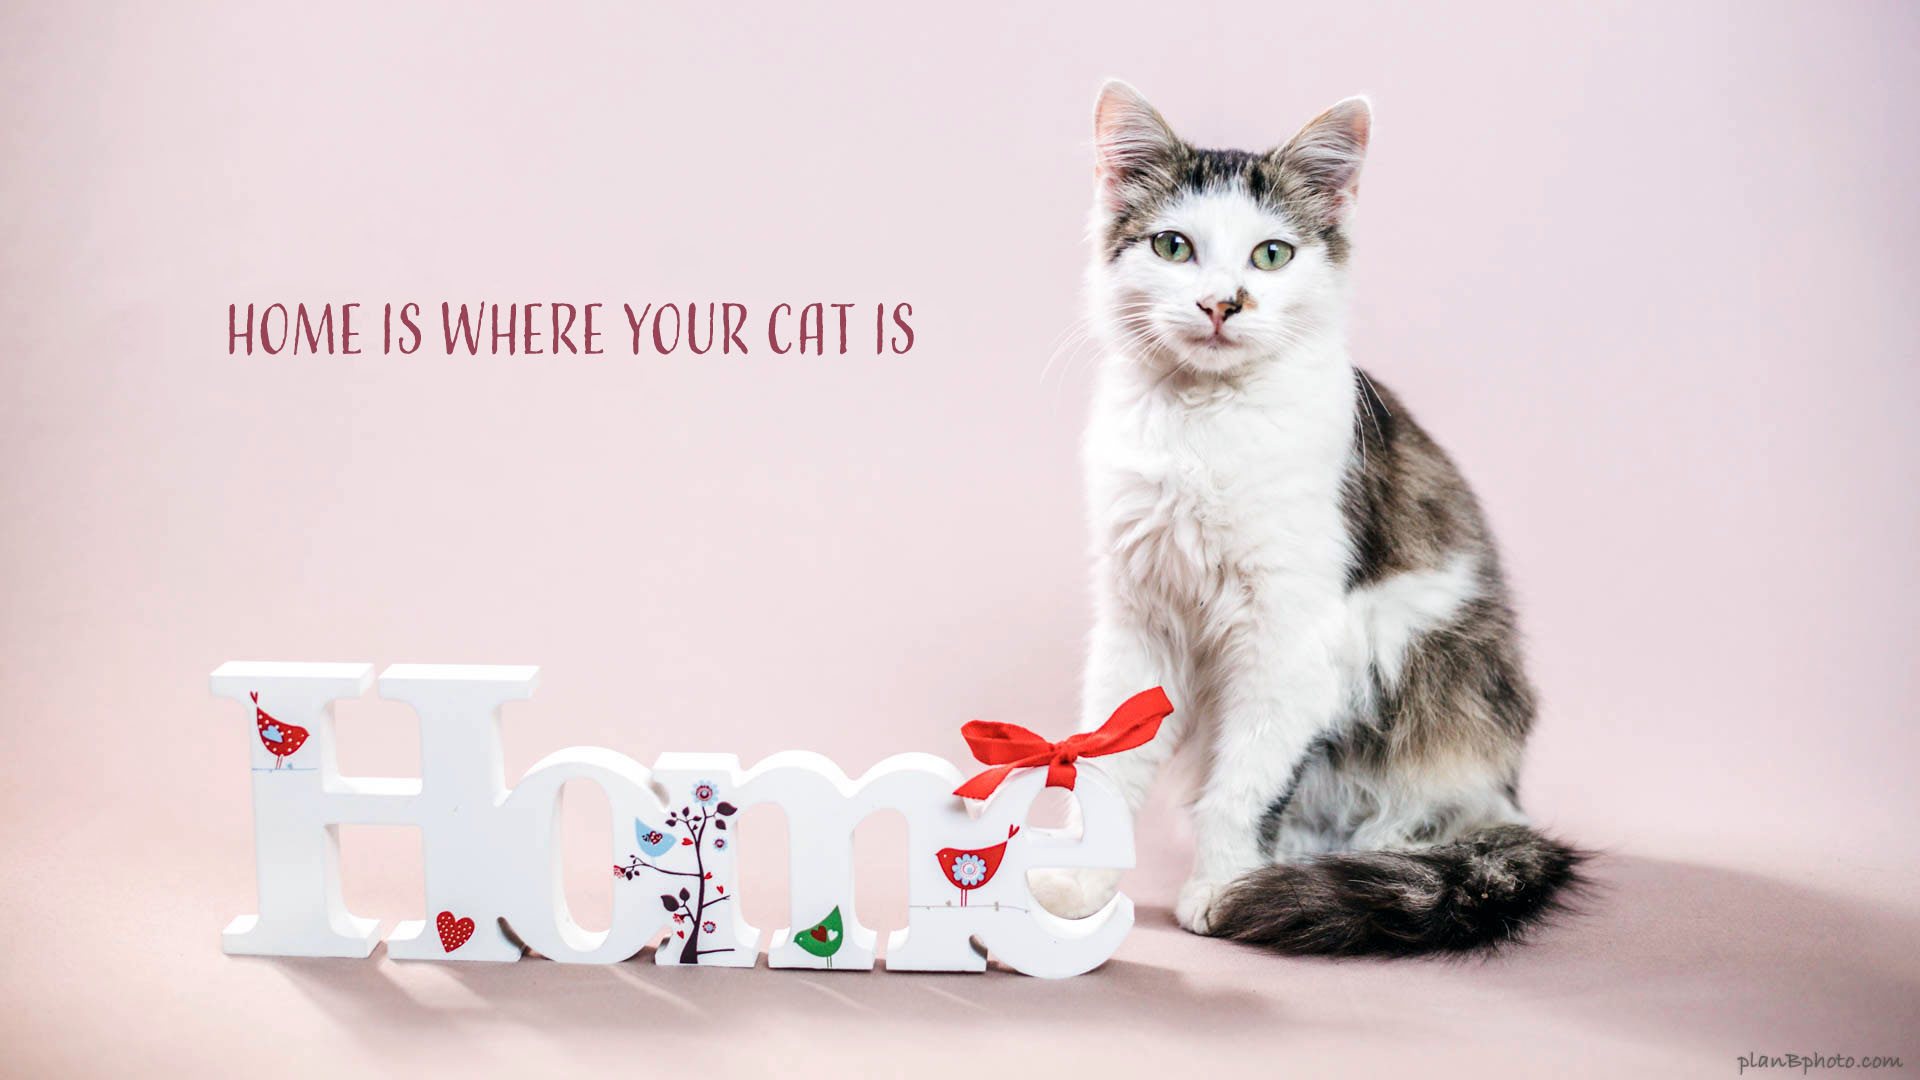 Home is where your cat is: Cute tabby cat near the words HOME on a light pink background